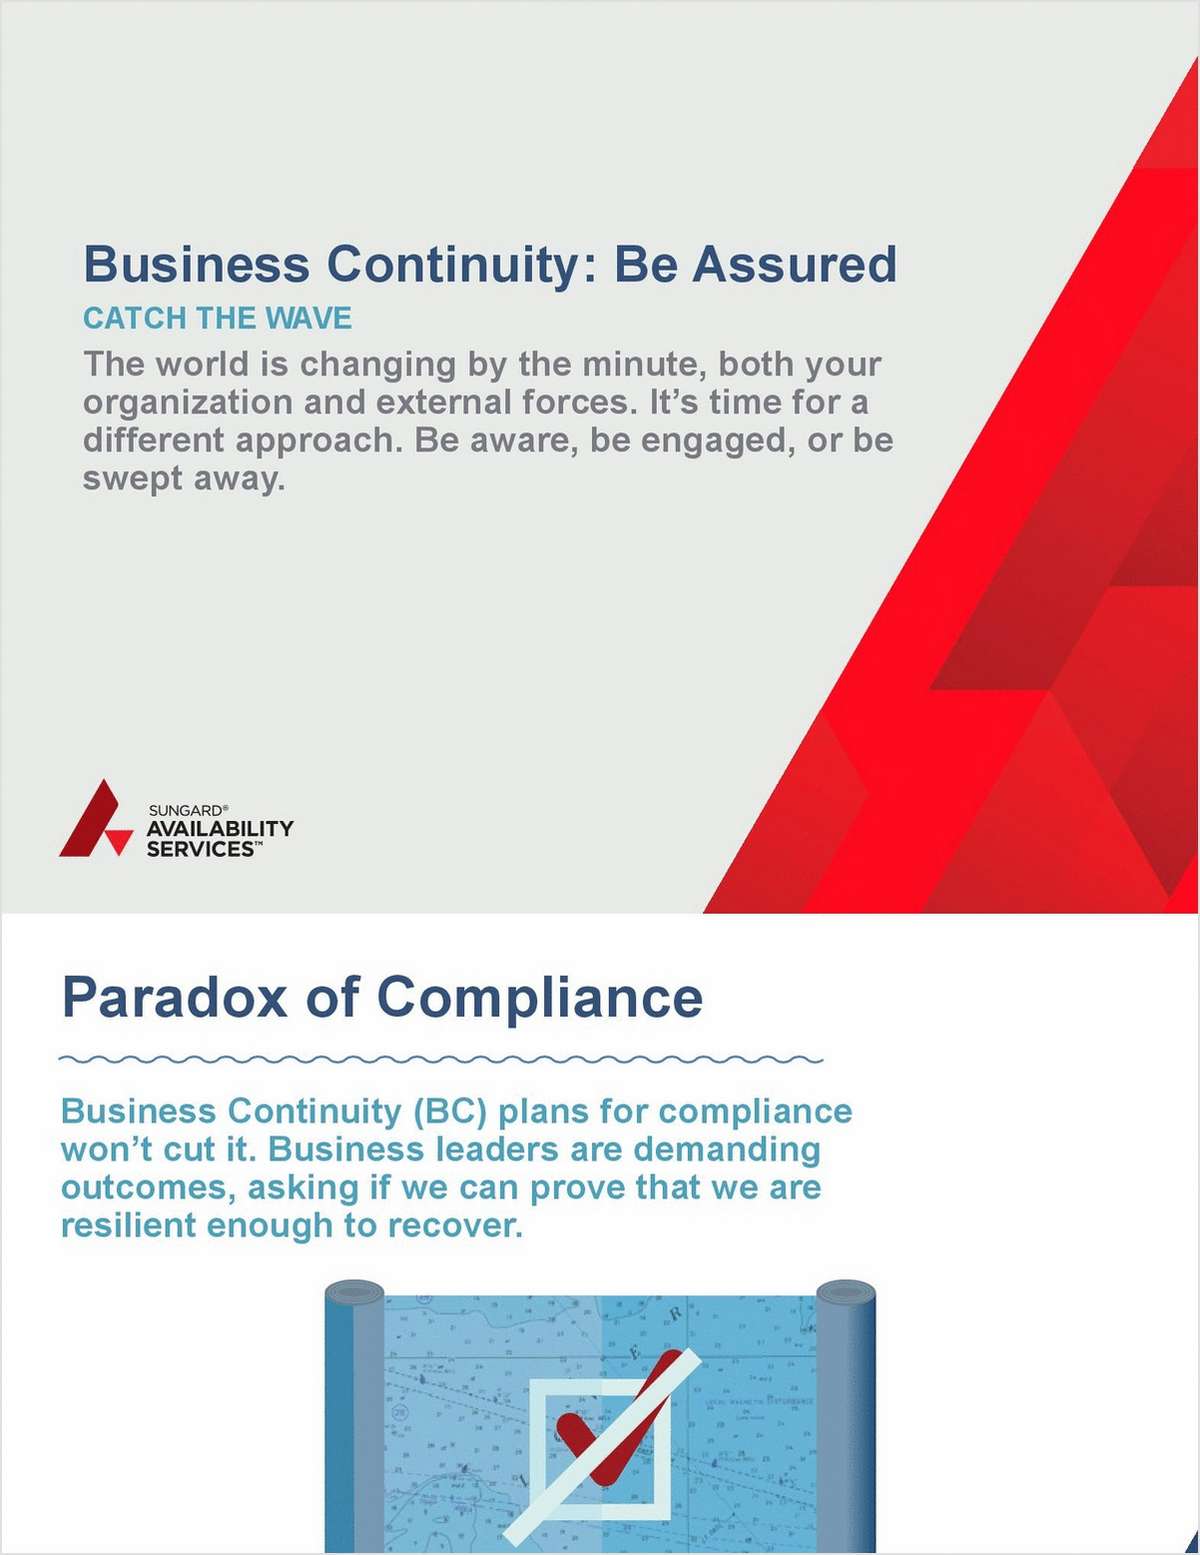 Are Your Business Continuity Plans Up To Par for Today's Changing World?